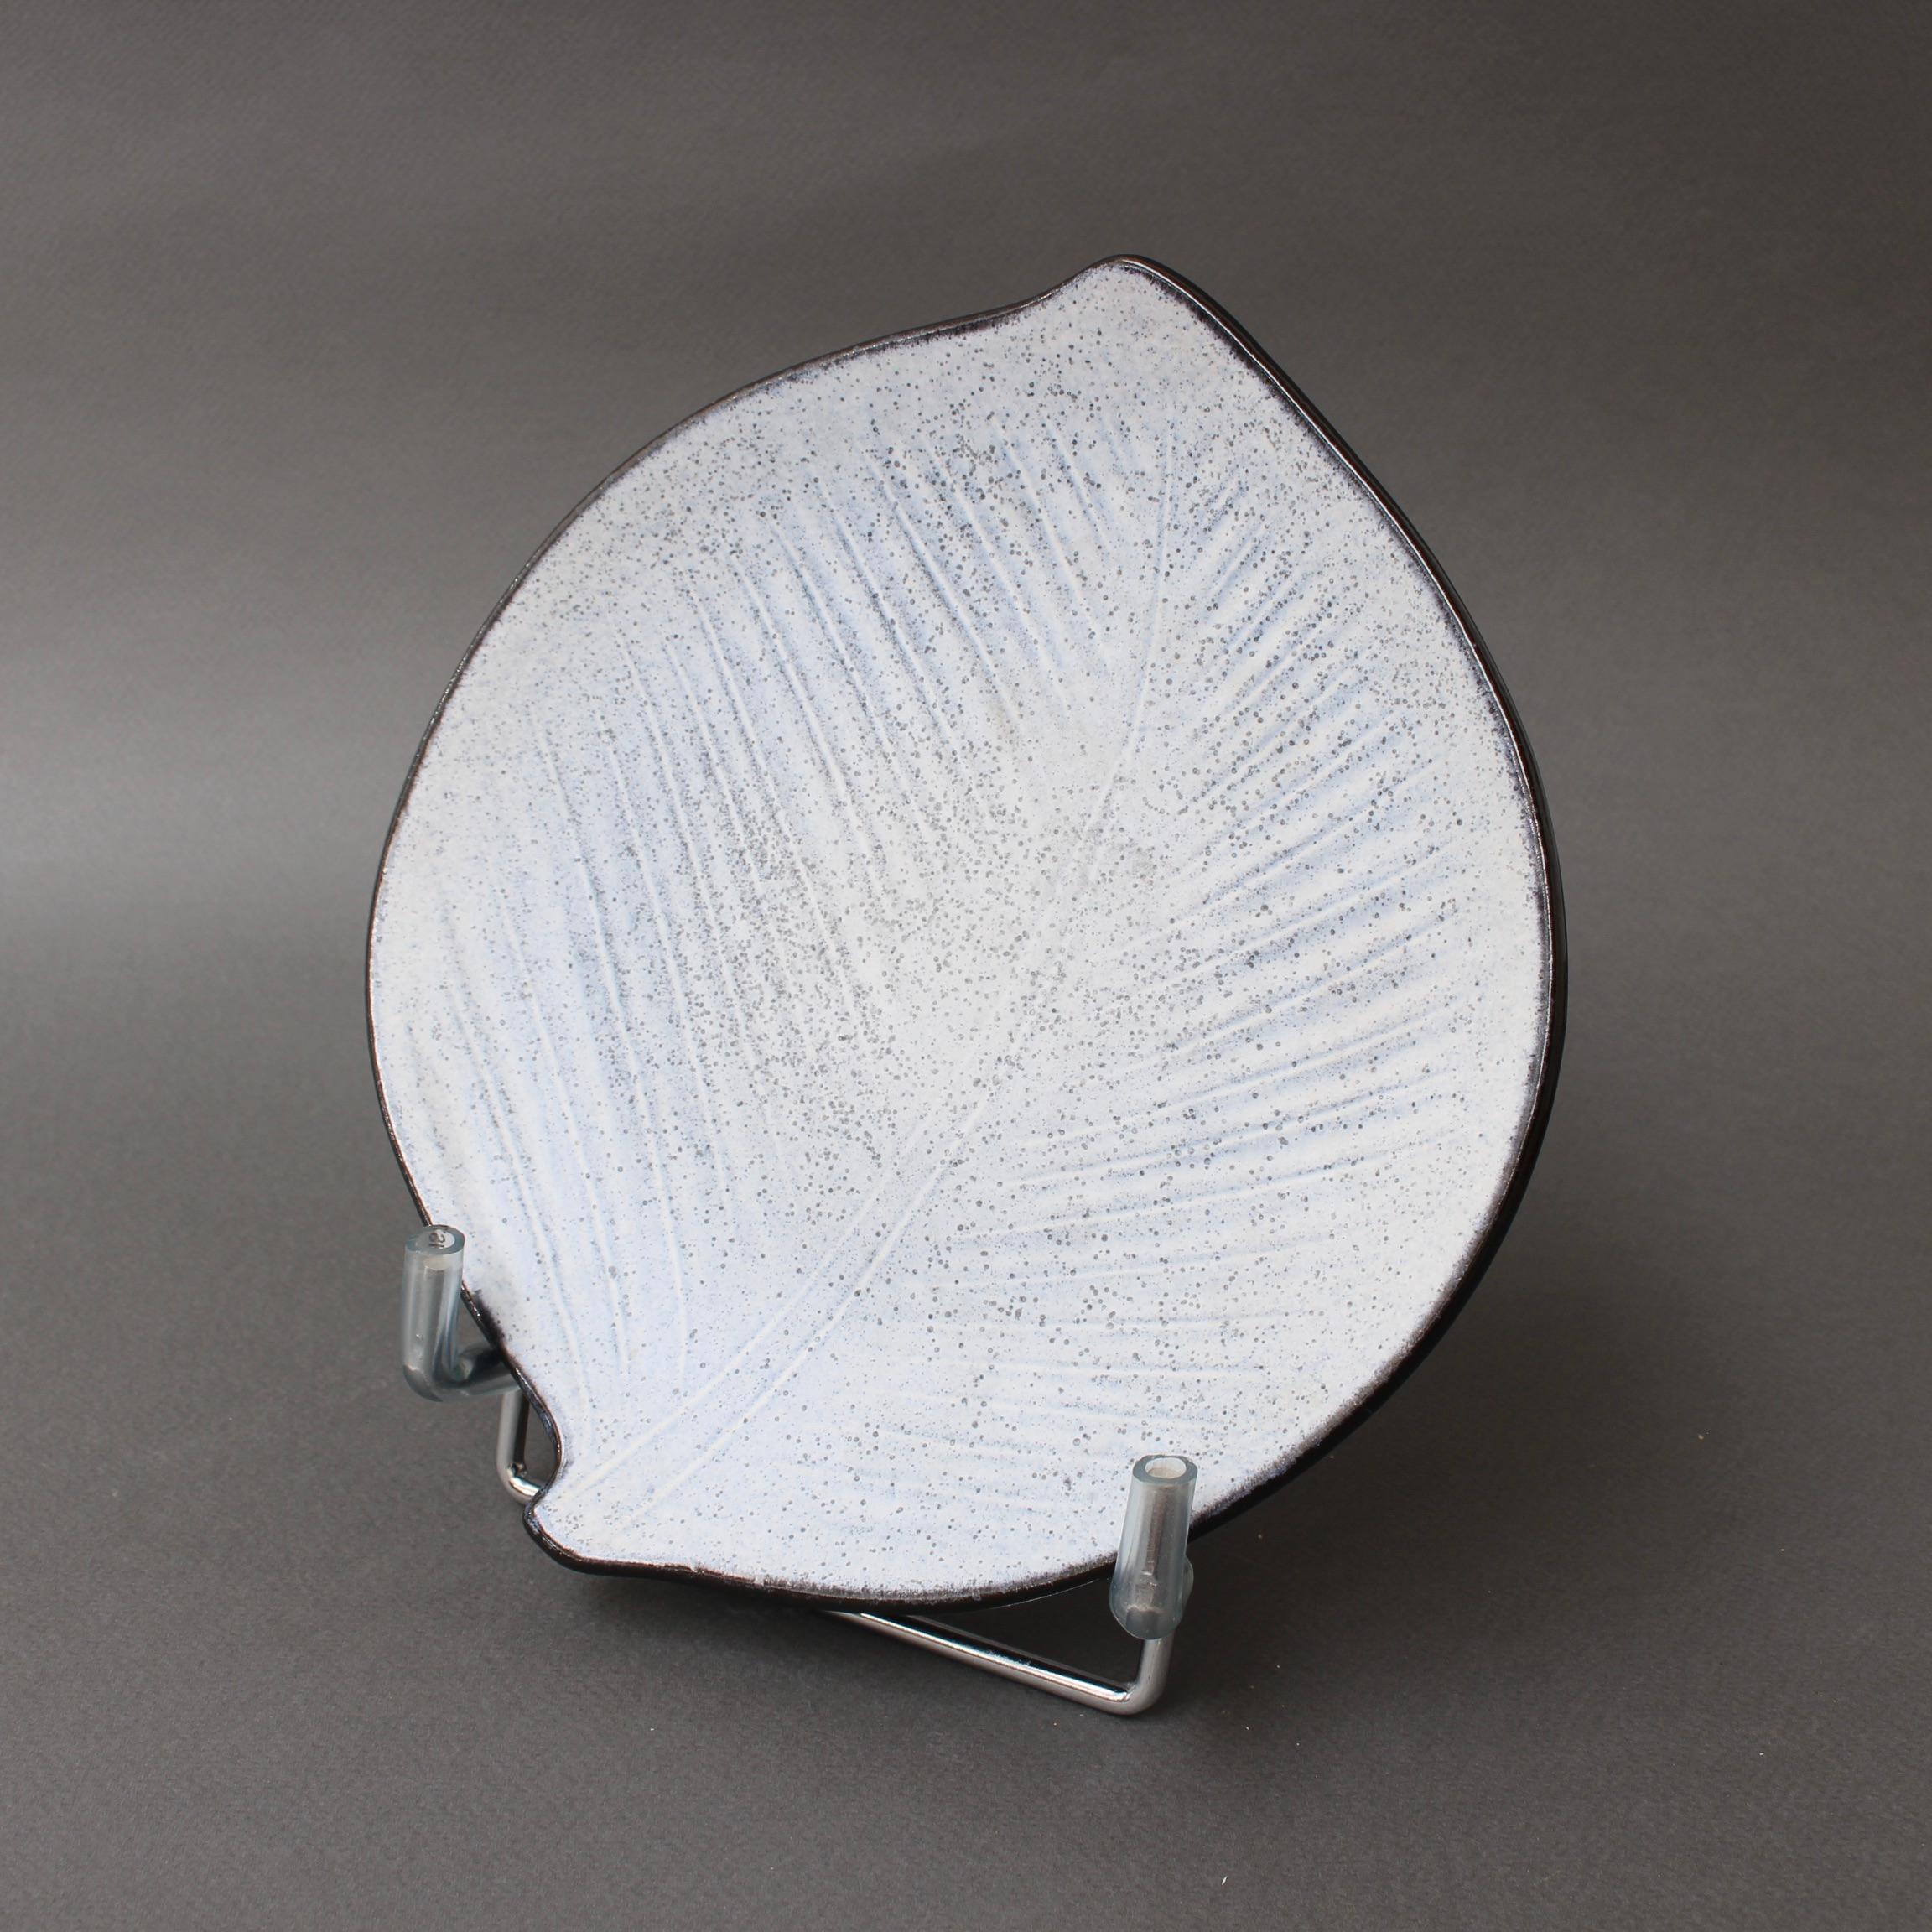 Vintage French leaf-shaped ceramic dish by Marcel Guillot, (circa 1960s). An impressive, modern dish with speckled, matte, off-white interior surface and leaf motif with slightly raised tactile lines such as leaf veins. In contrast, the bottom